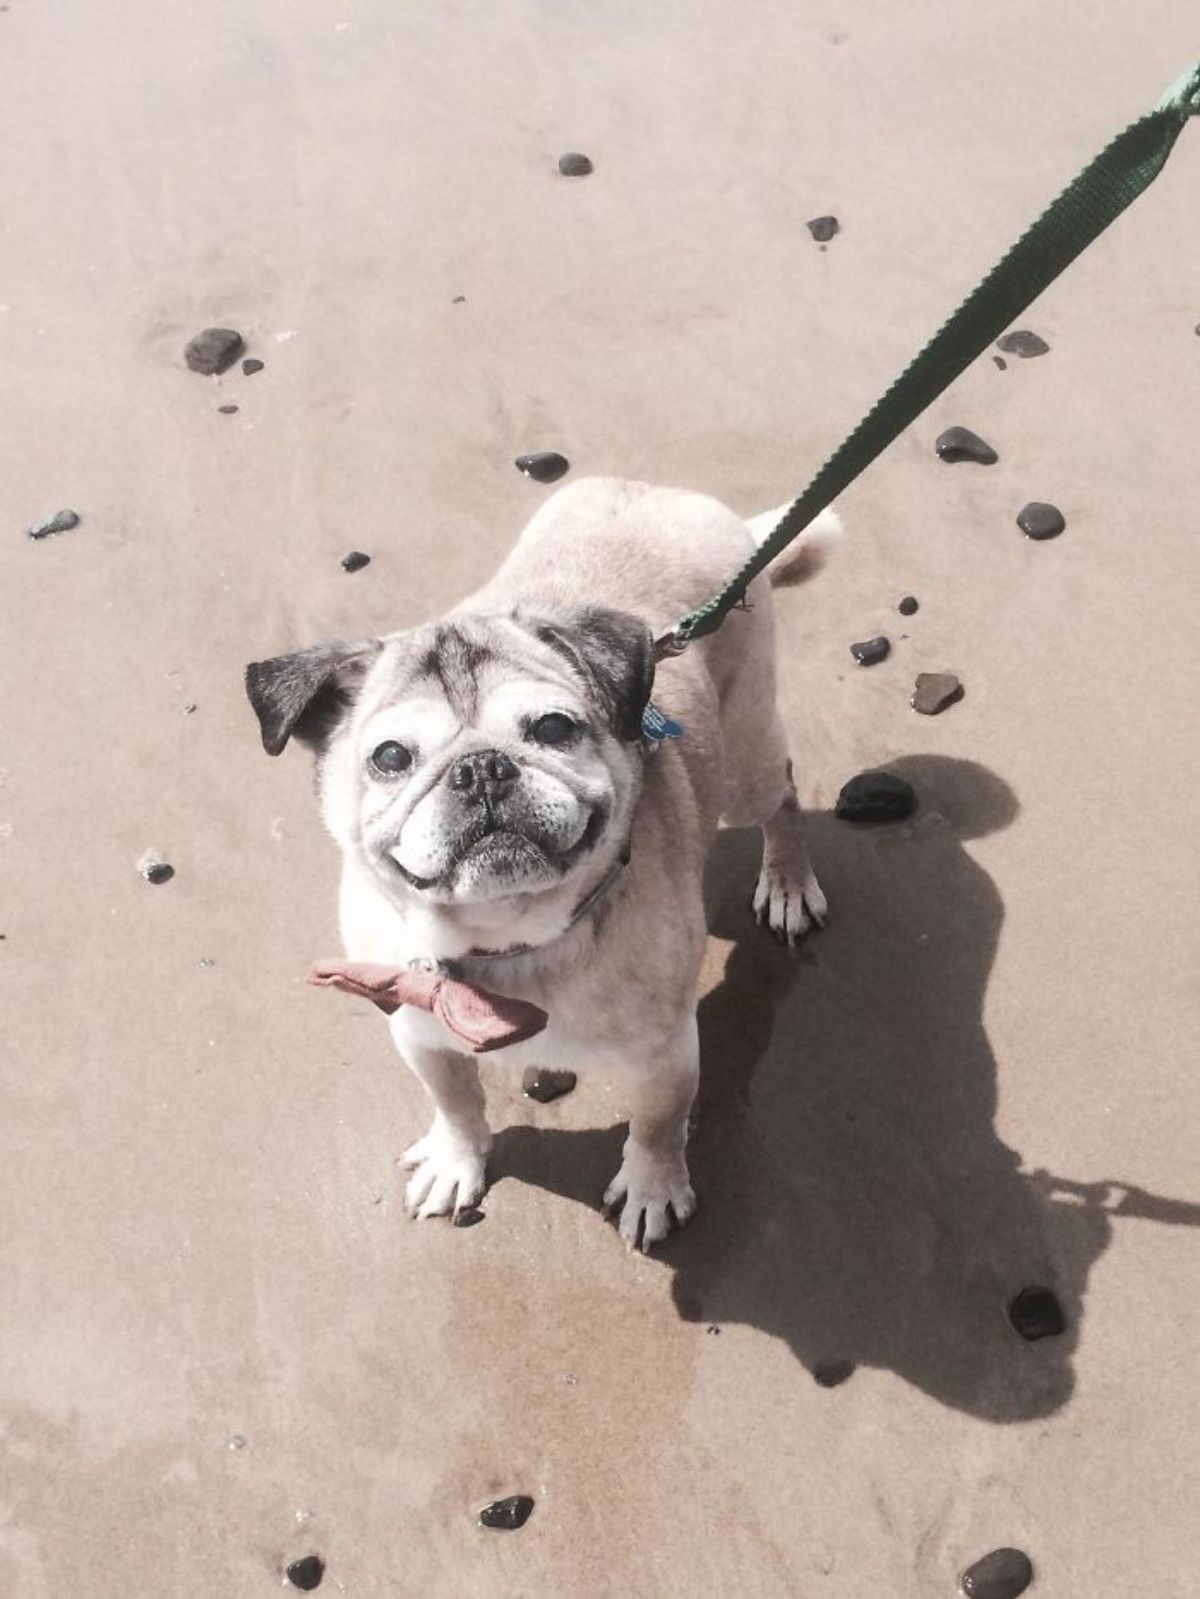 old brown pug standing on beach with some water with the dog on a leash and wearing a brown bow tie